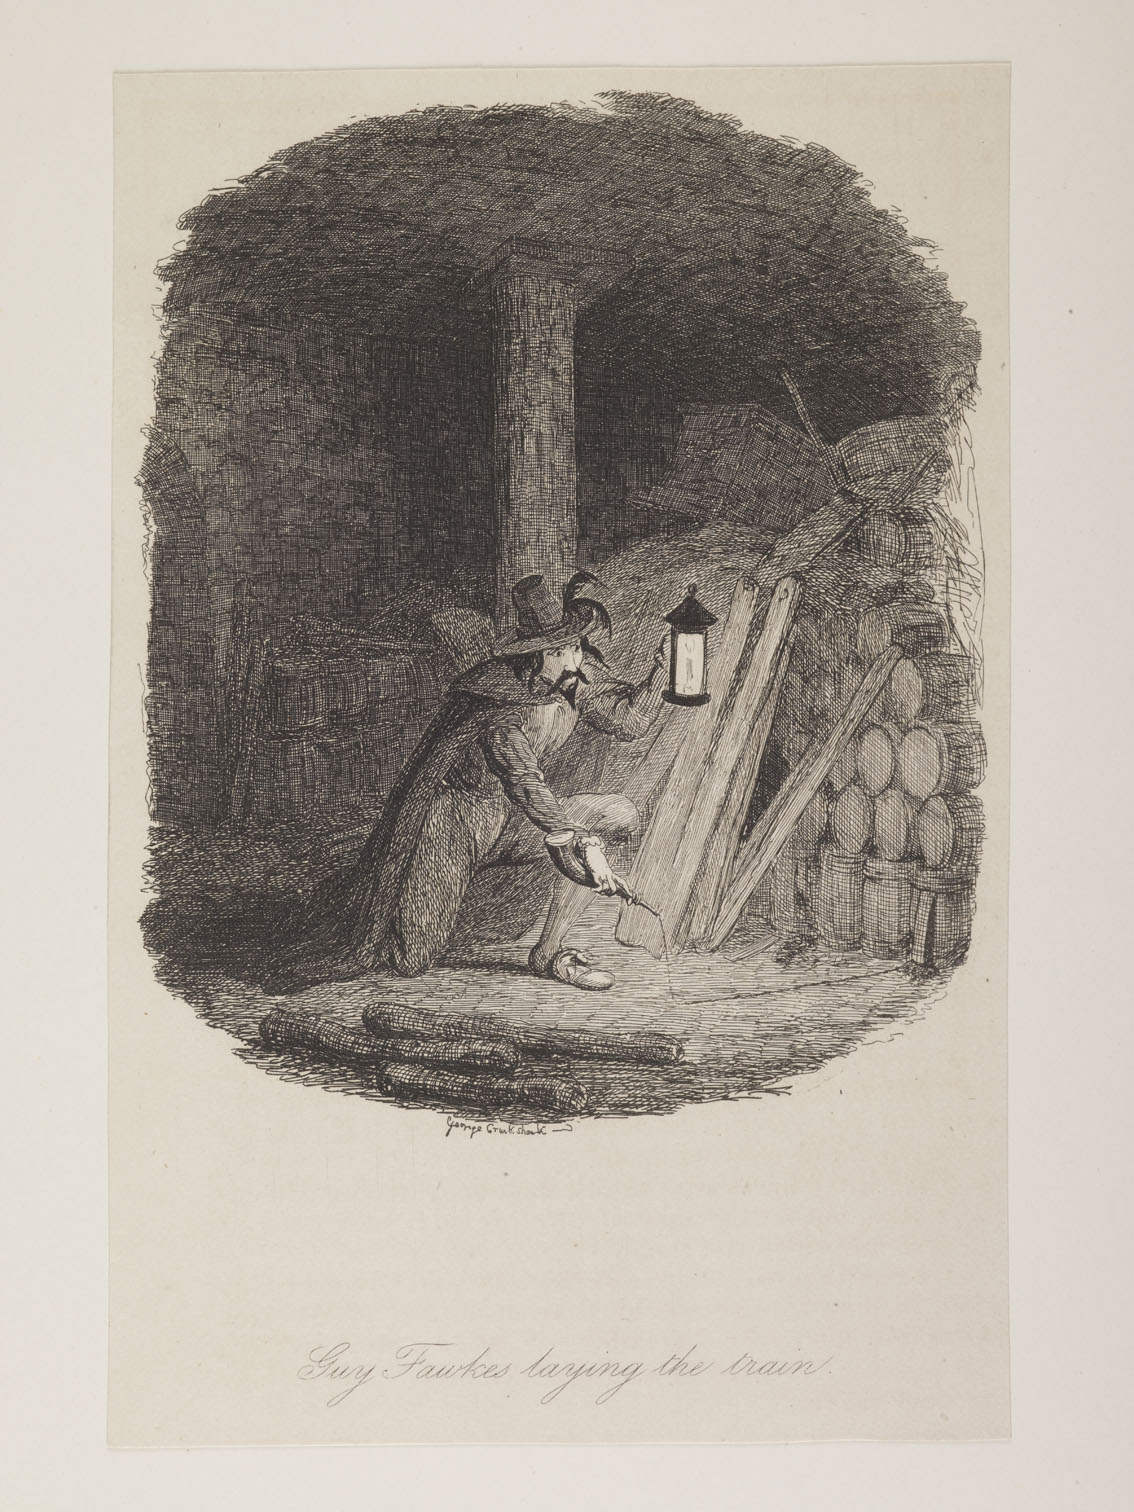 Part of 22 etchings by George Cruikshank from W.H. Ainsworth's 1841 novel, Guy Fawkes. (ID no.: 54.122/2)

